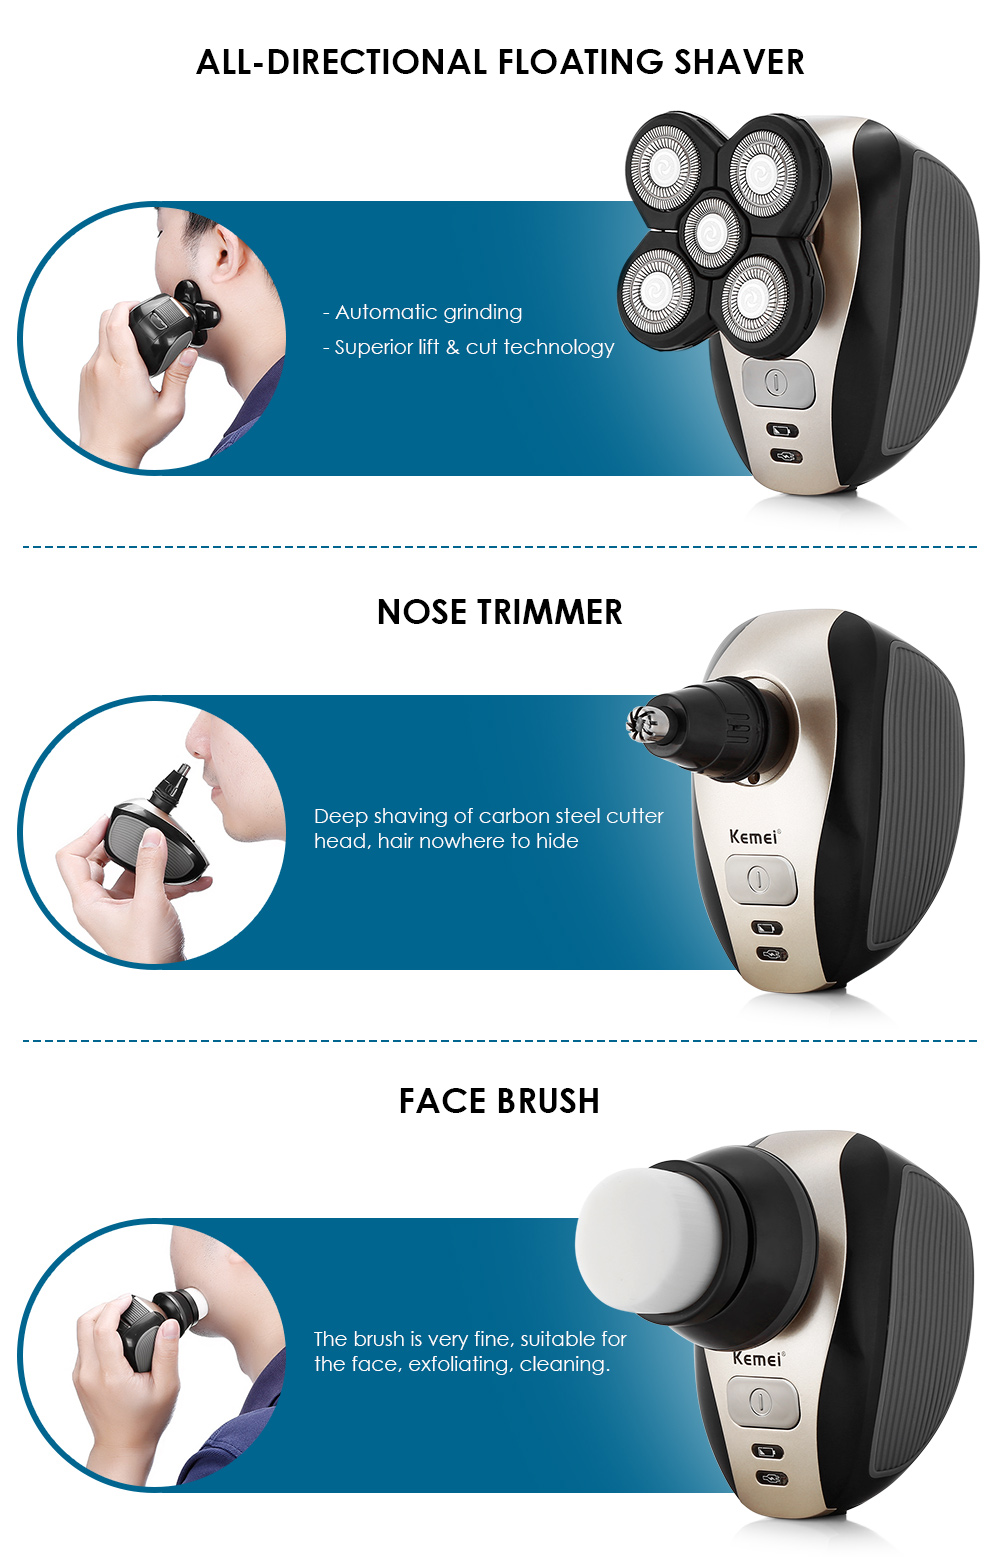 KM - 1000 4D Male Face Care 5-in-1 Suit Replaceable Portable Razor Nose Trimmer Hair Clipper Electric Shaver